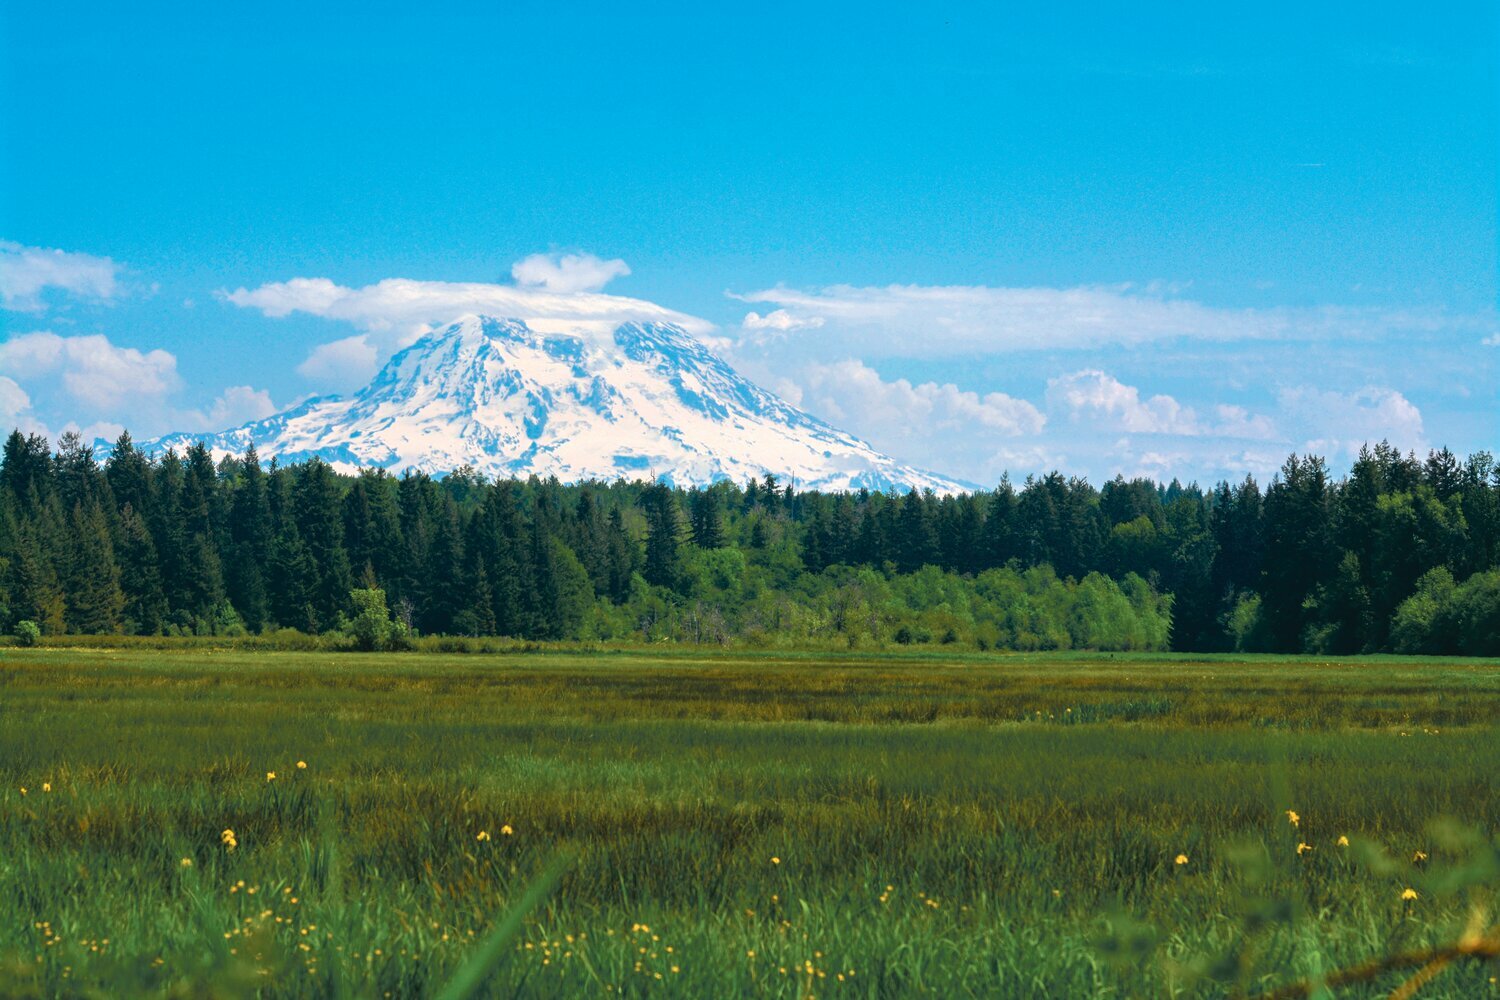 Mt. Rainier sits behind a grass field and trees near Lake Lawrence on Saturday, May 20.